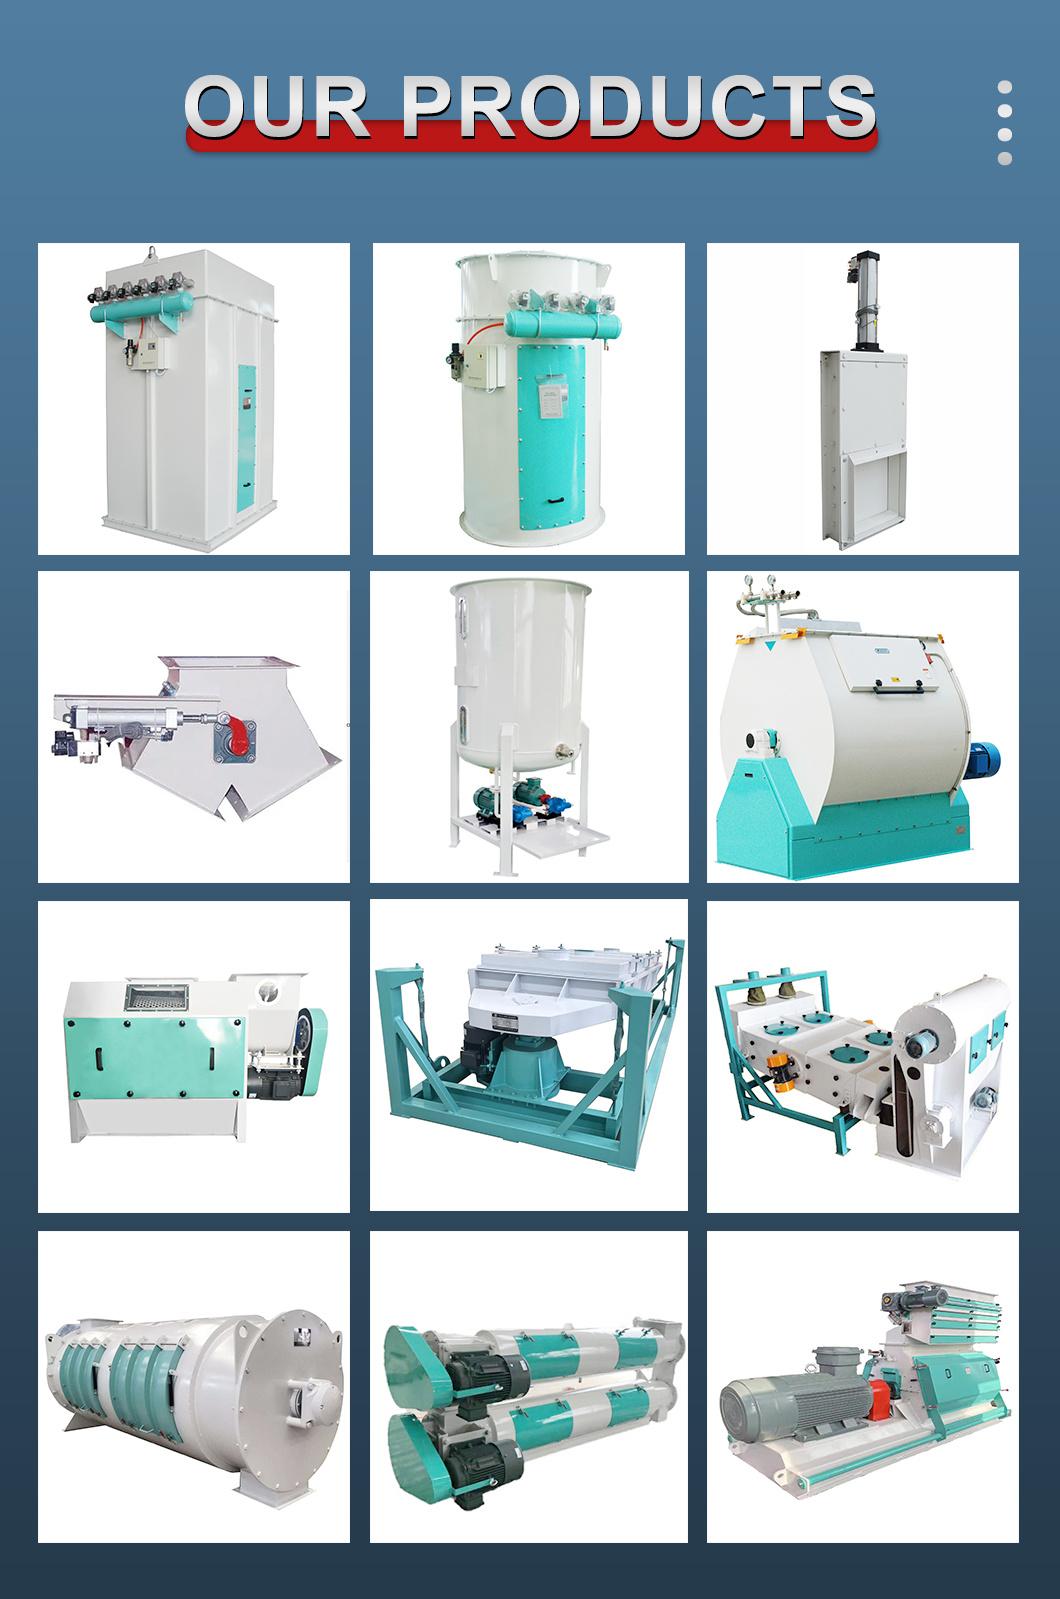 Widely Used Wide Type Micro Pulverizer Hot Sale